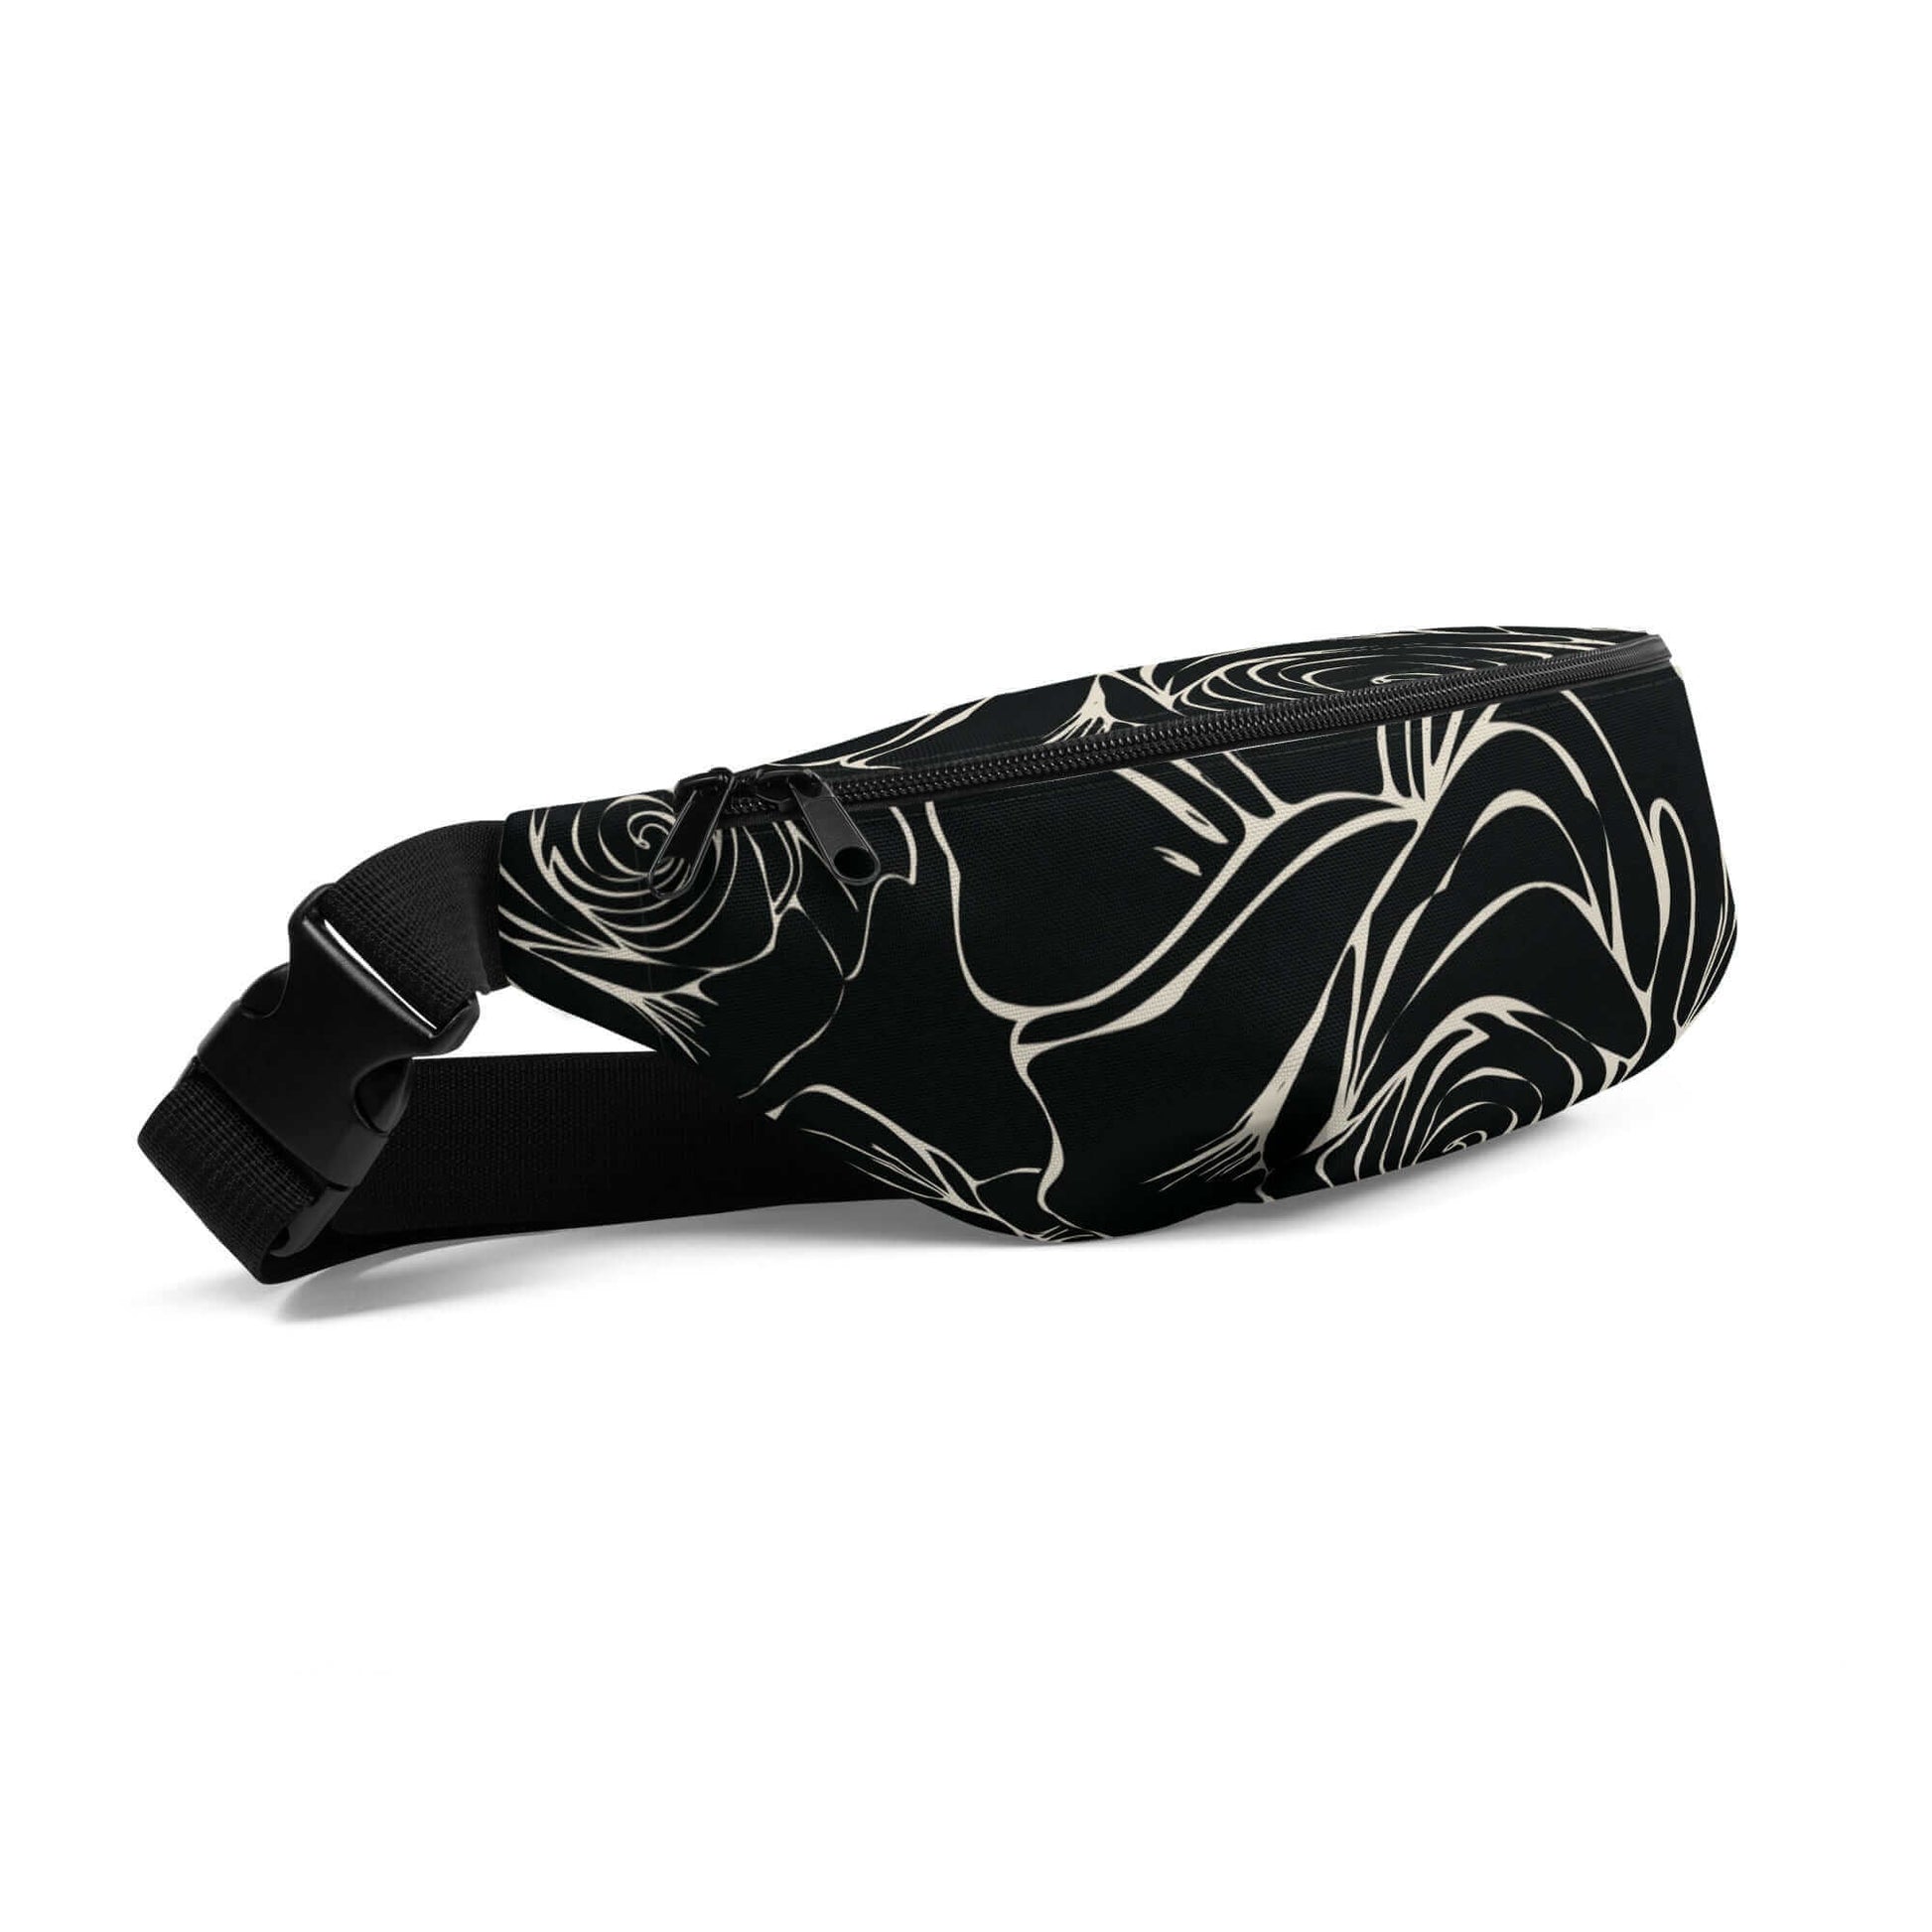 Gallica Fanny Pack, Black side view